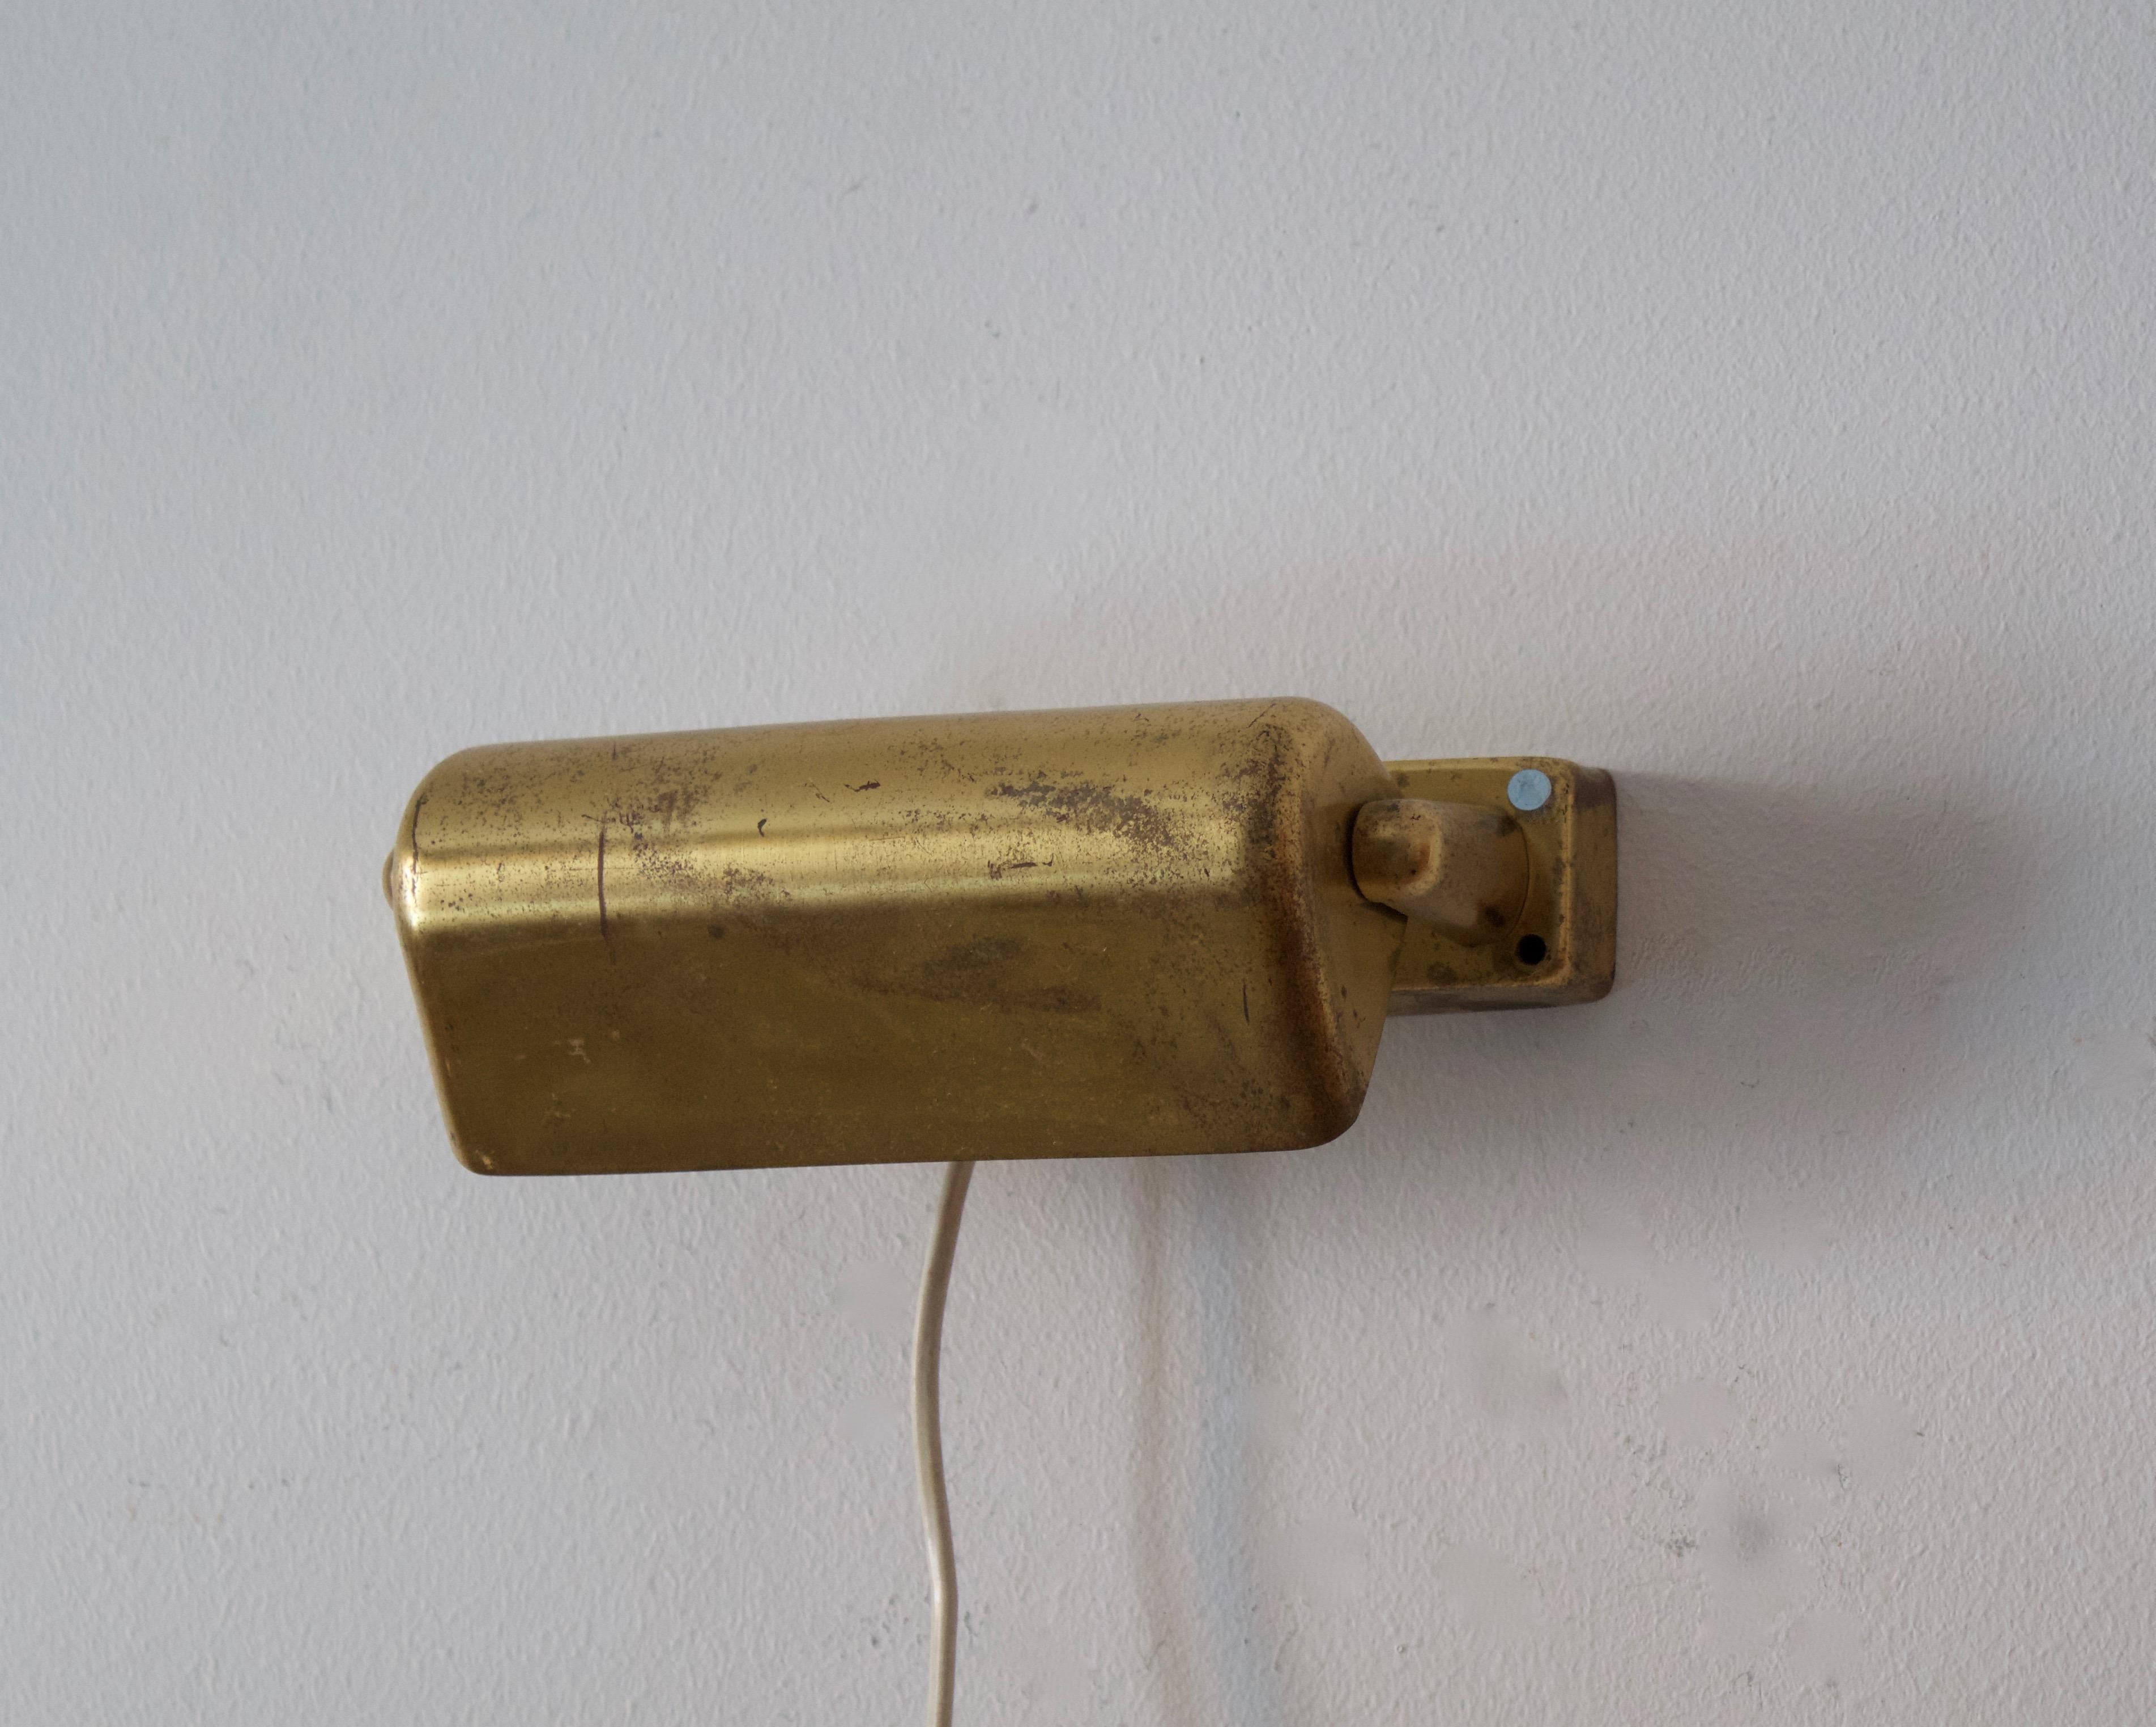 A small adjustable functionalist wall sconce / wall light, designed and produced by Lyfa, Denmark, 1950s. 

Other designers of the period include Paavo Tynell, Le Corbusier, Josef Frank, Kaare Klint, and Alvar Aalto.